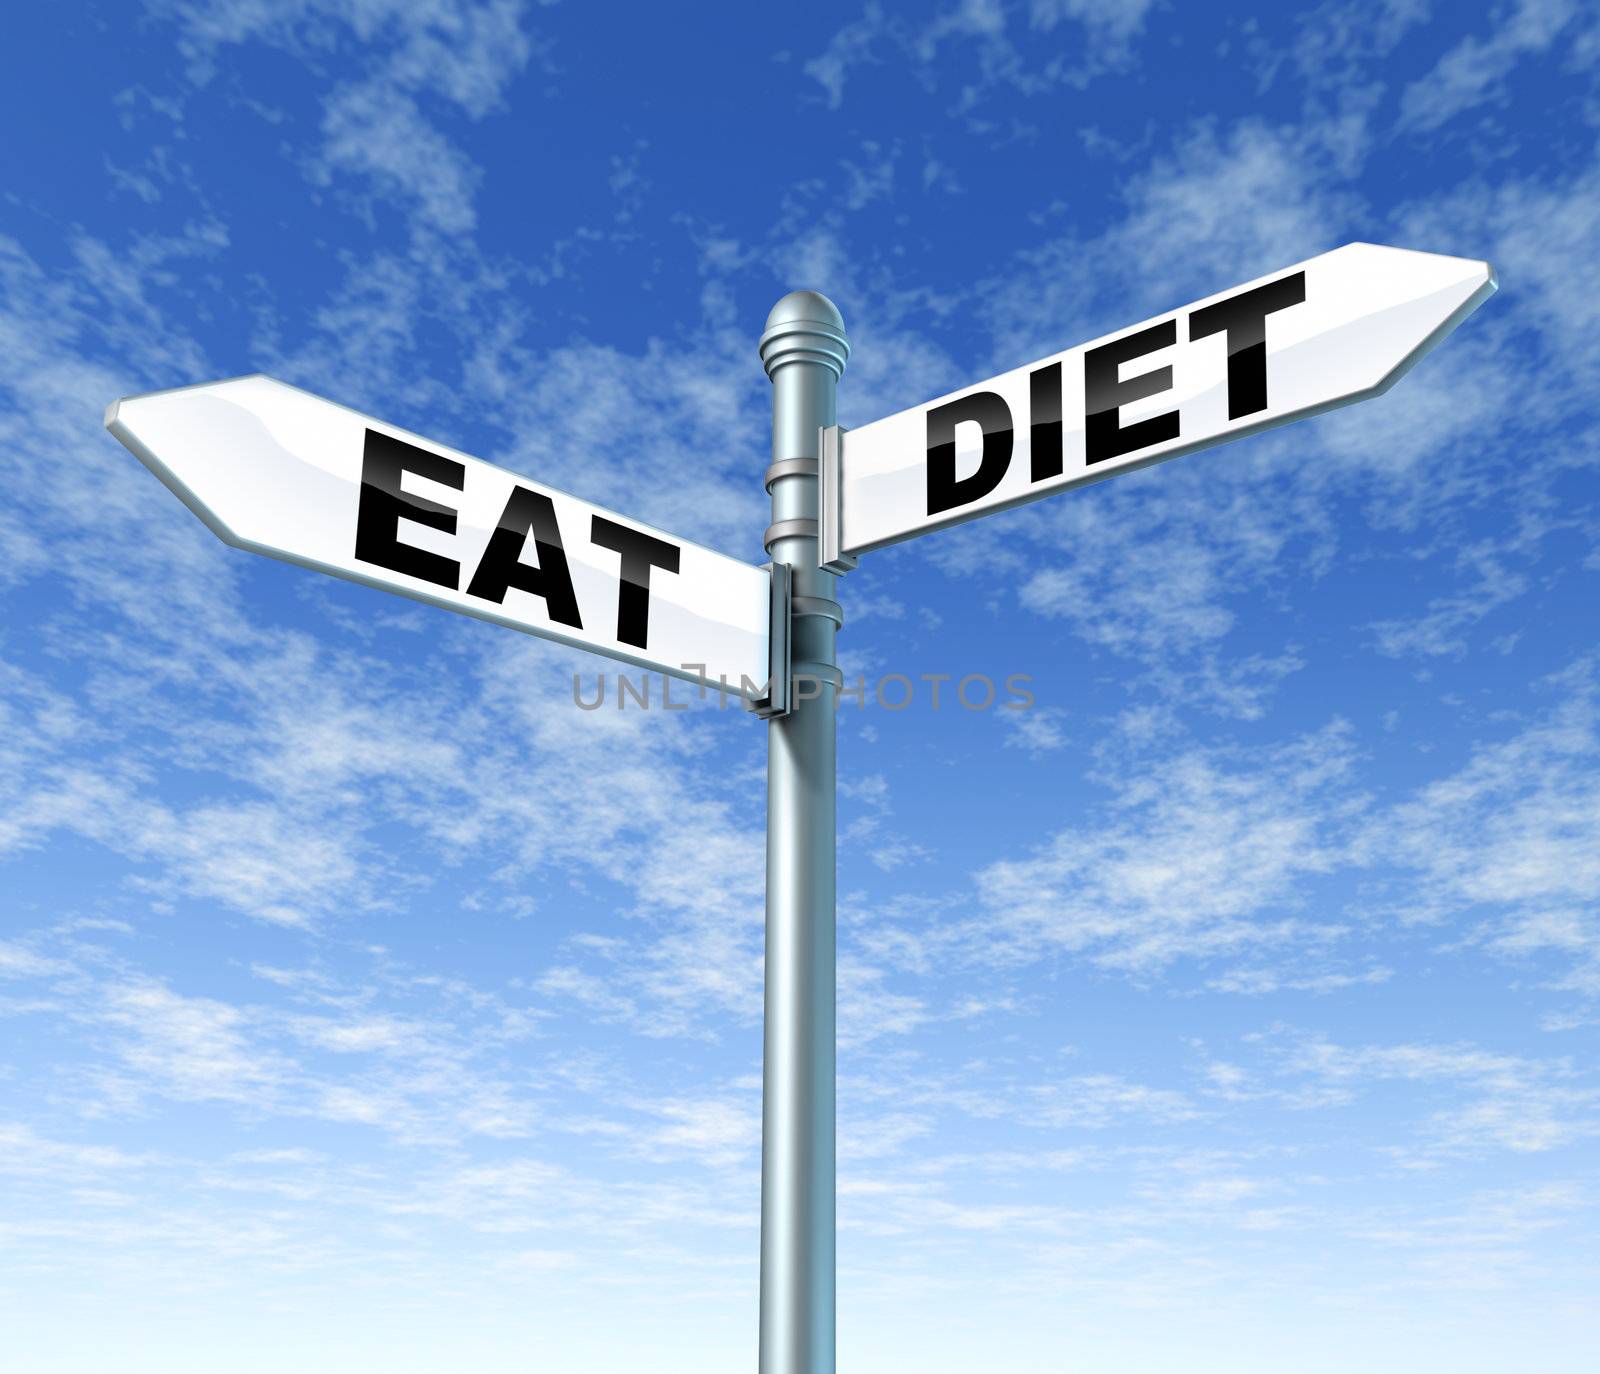 Eat And Diet Street Sign by brightsource